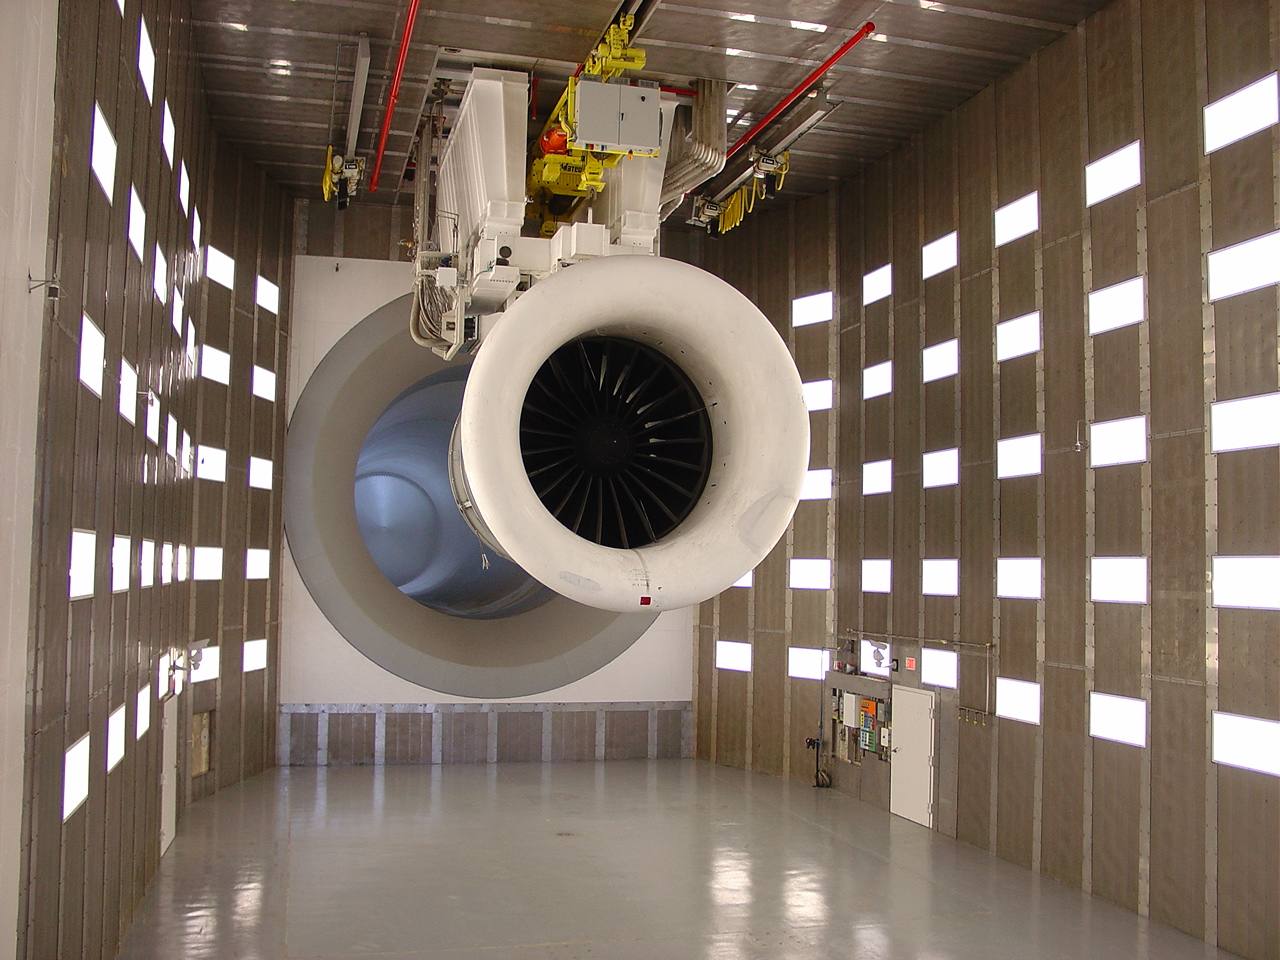 Inside GE Peebles: See the guts of jet engines